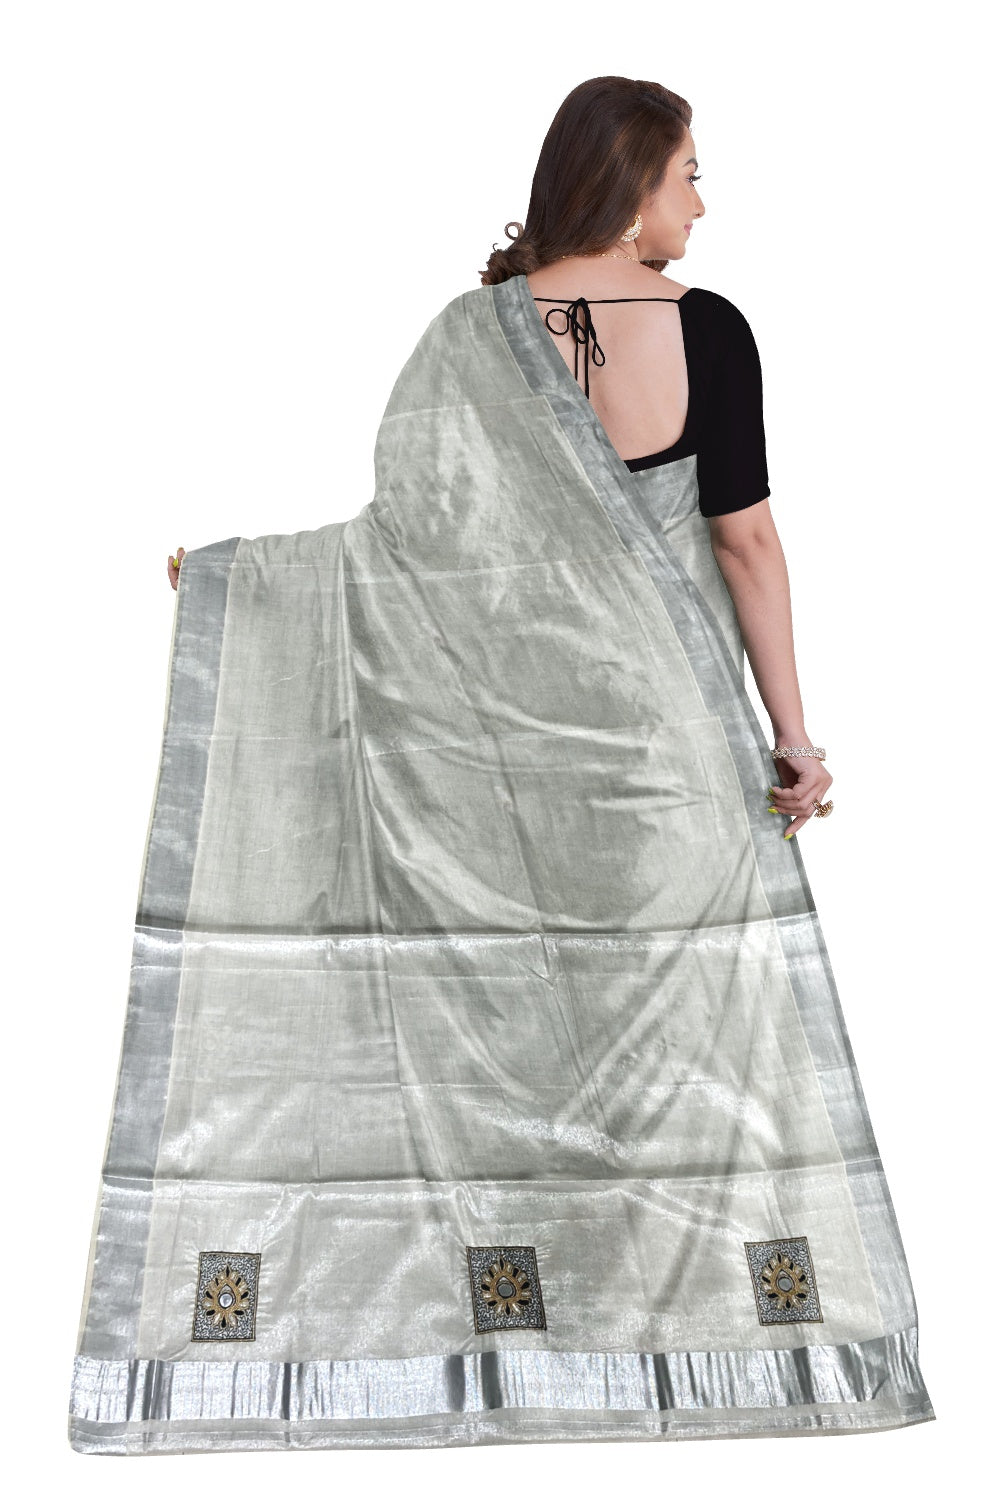 Silver Kasavu Tissue Saree with Black and Gold Bead Work (Blouse Piece with Work Included)